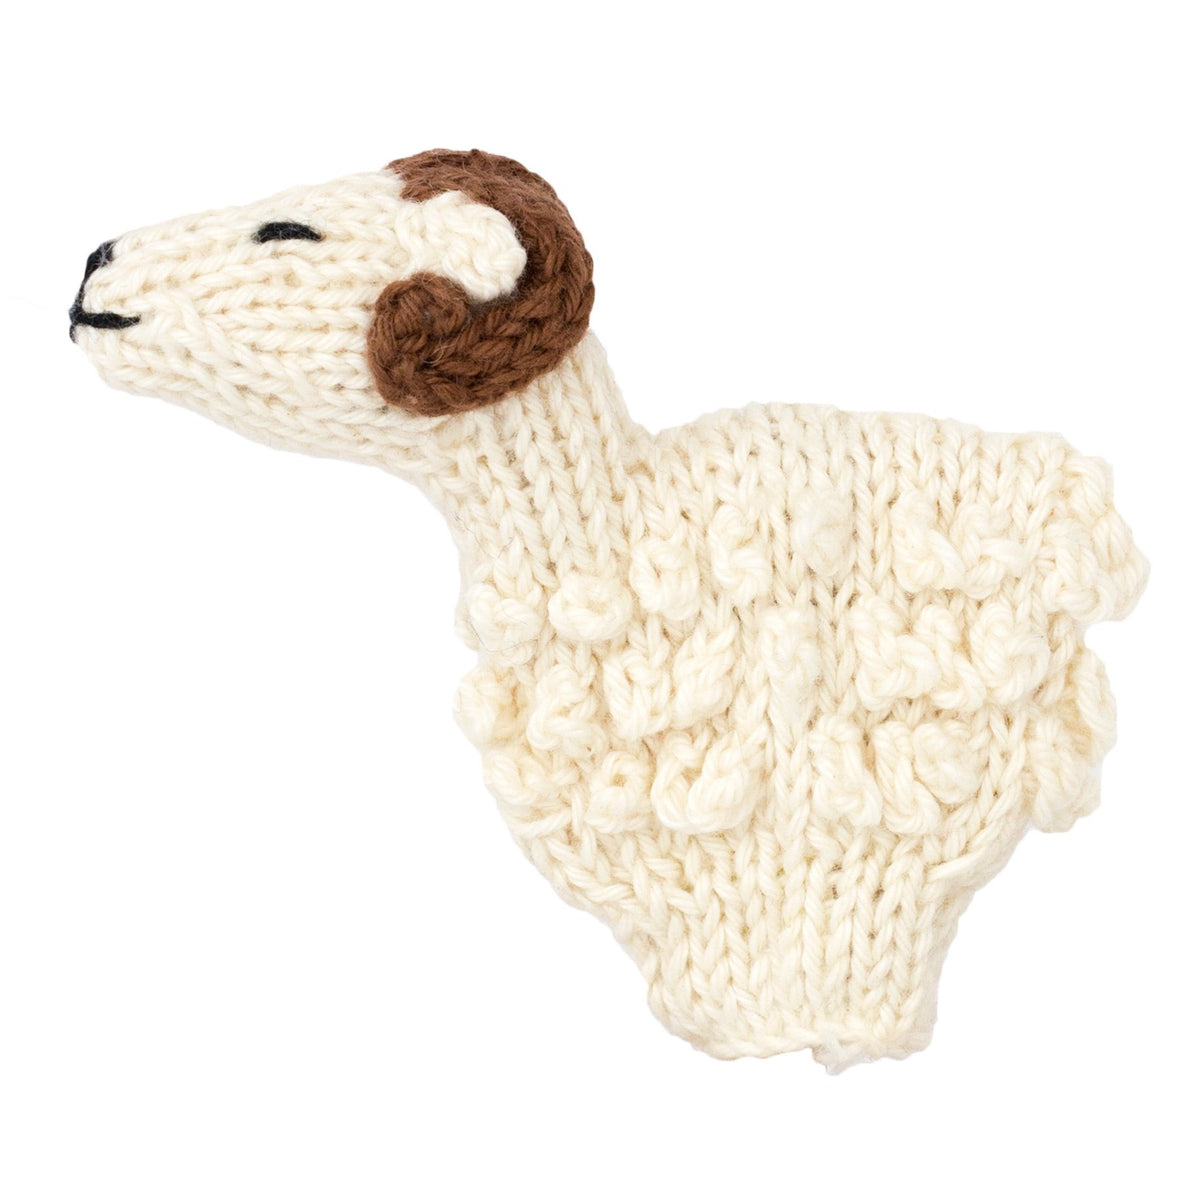 Horned Sheep - Bright Organic Cotton Finger Puppet